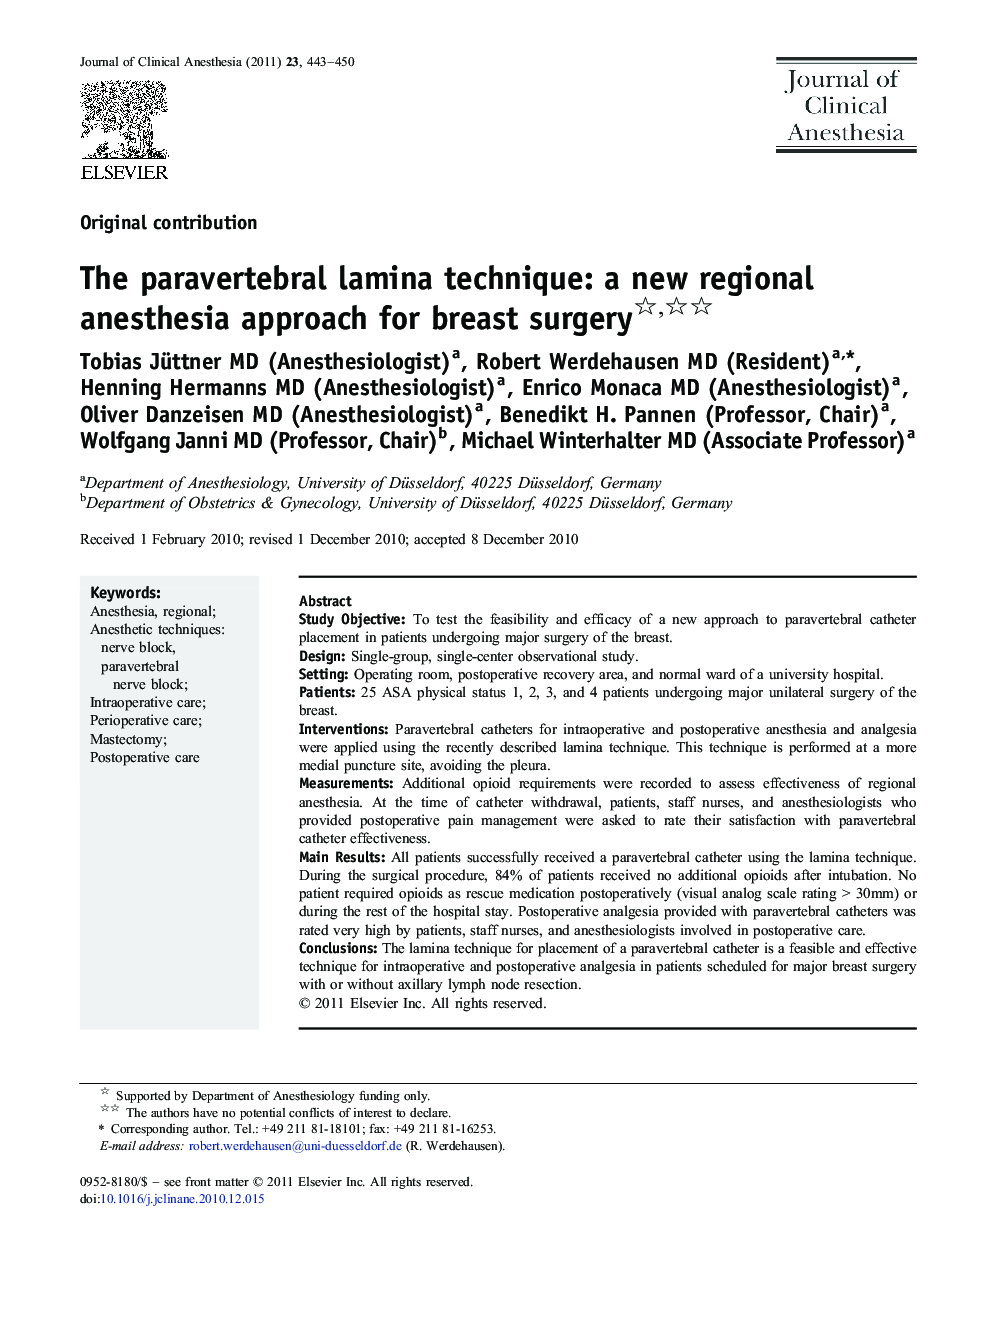 The paravertebral lamina technique: a new regional anesthesia approach for breast surgery 